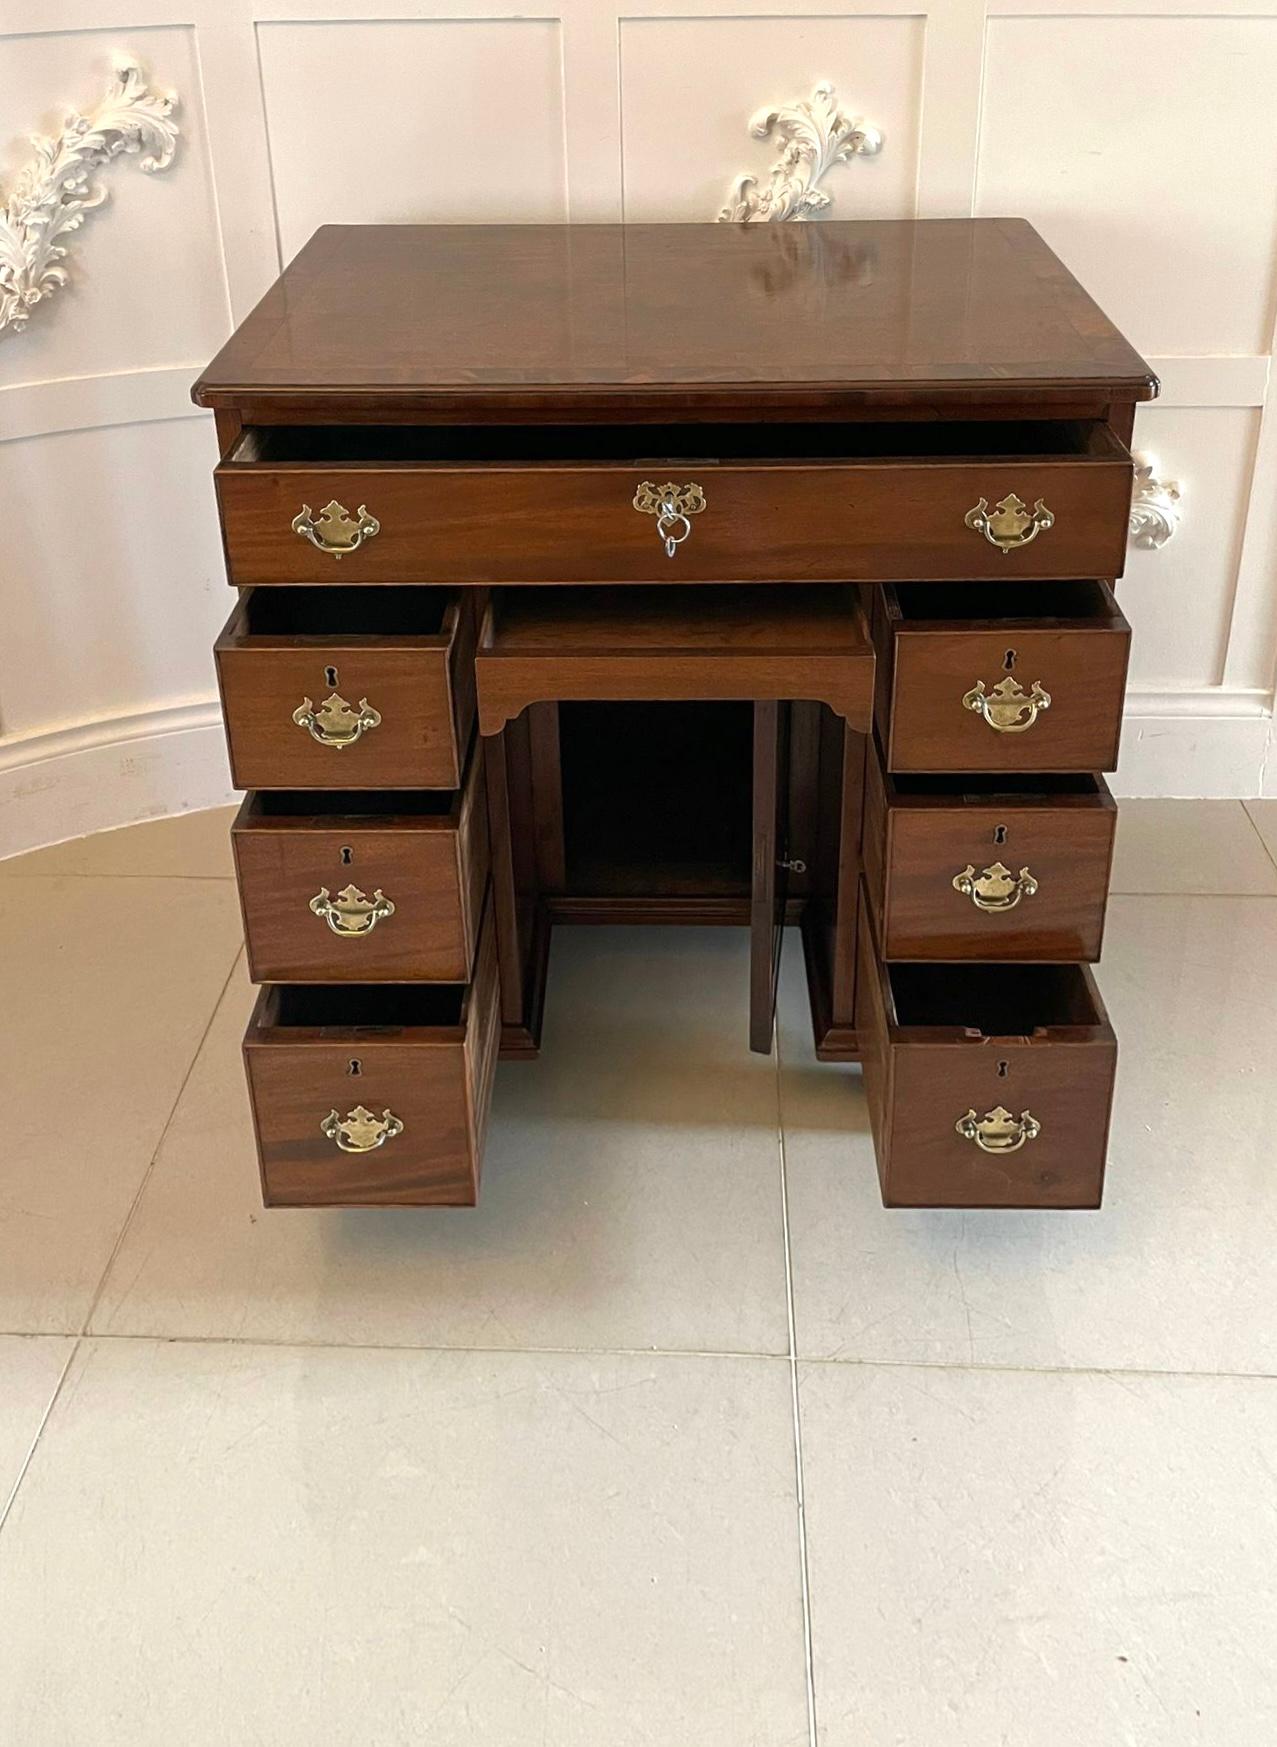 Antique George III quality mahogany knee hole desk having a quality mahogany rectangular shaped crossbanded top with a moulded edge above one long and six small cockbeeded oak lined drawers with original brass handles, secret drawer to the knee hole